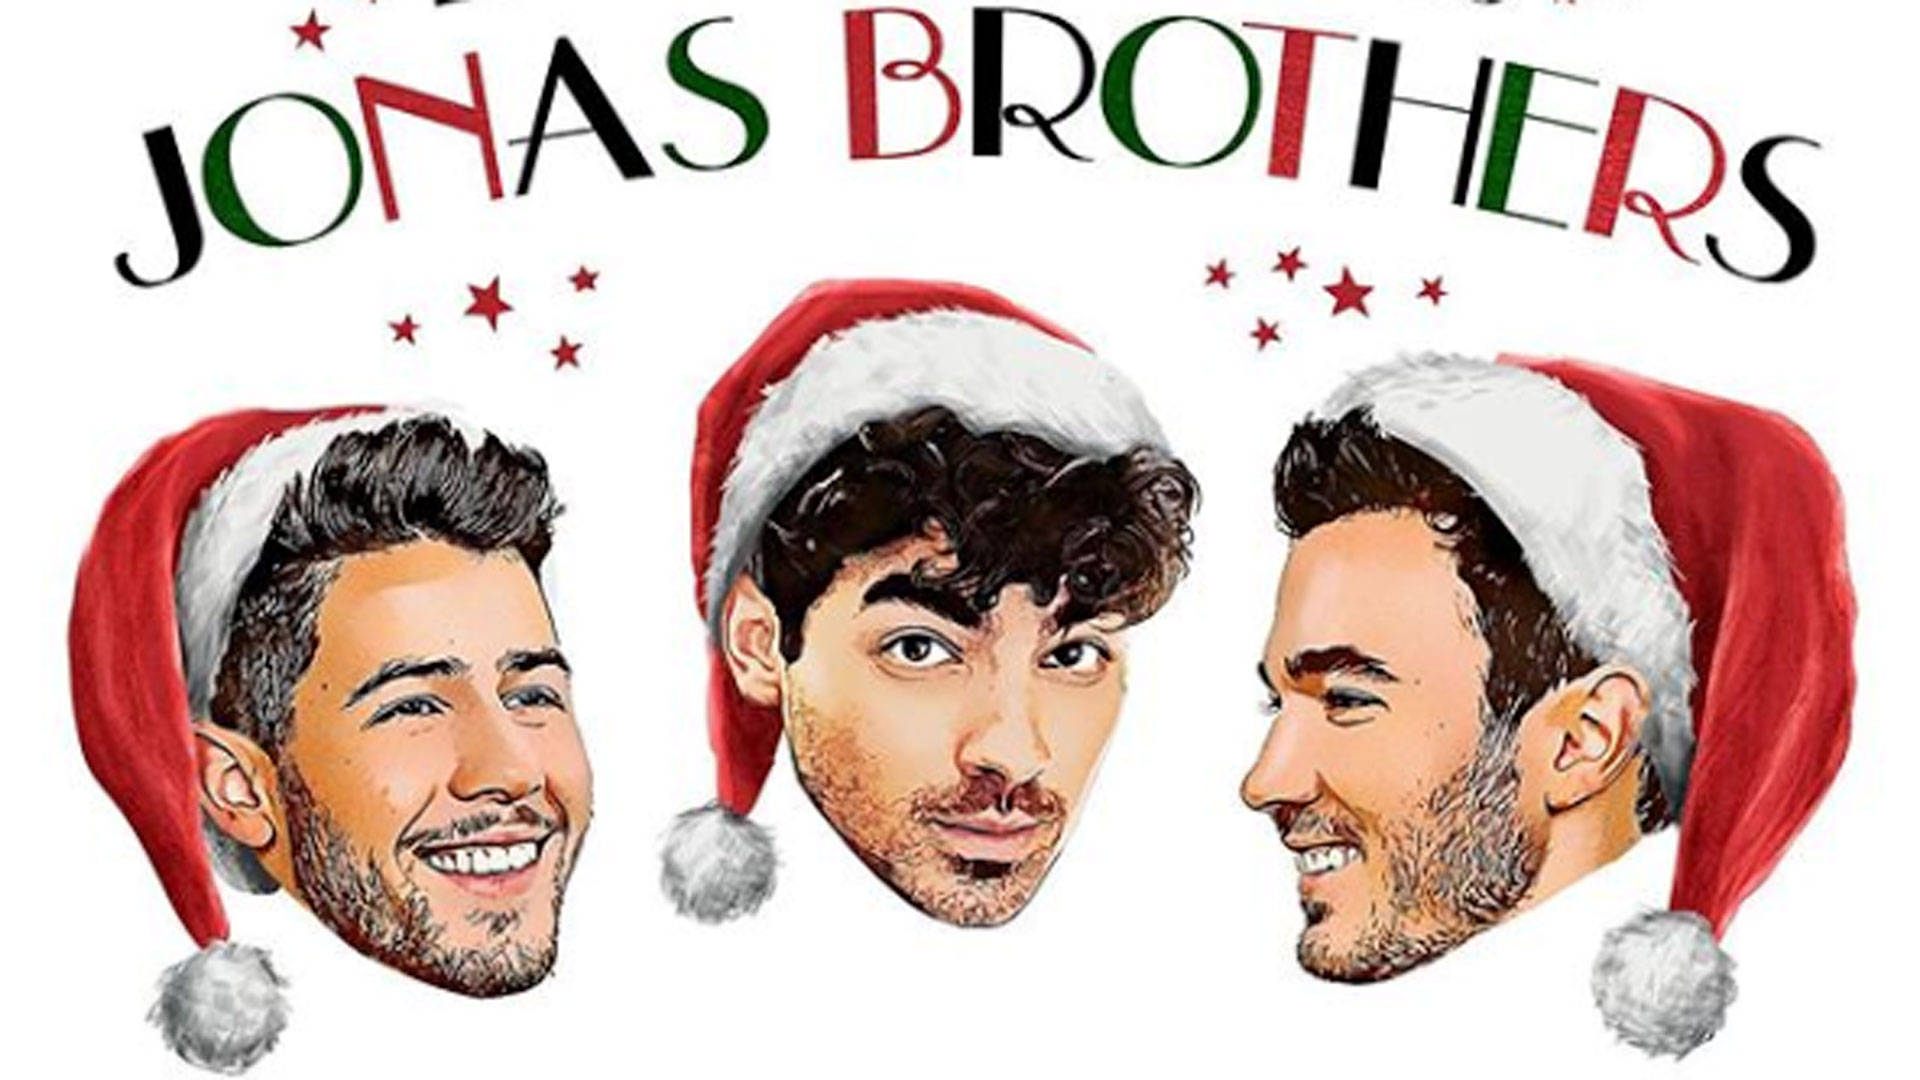 Christmas-inspired Jonas Brothers Poster Background